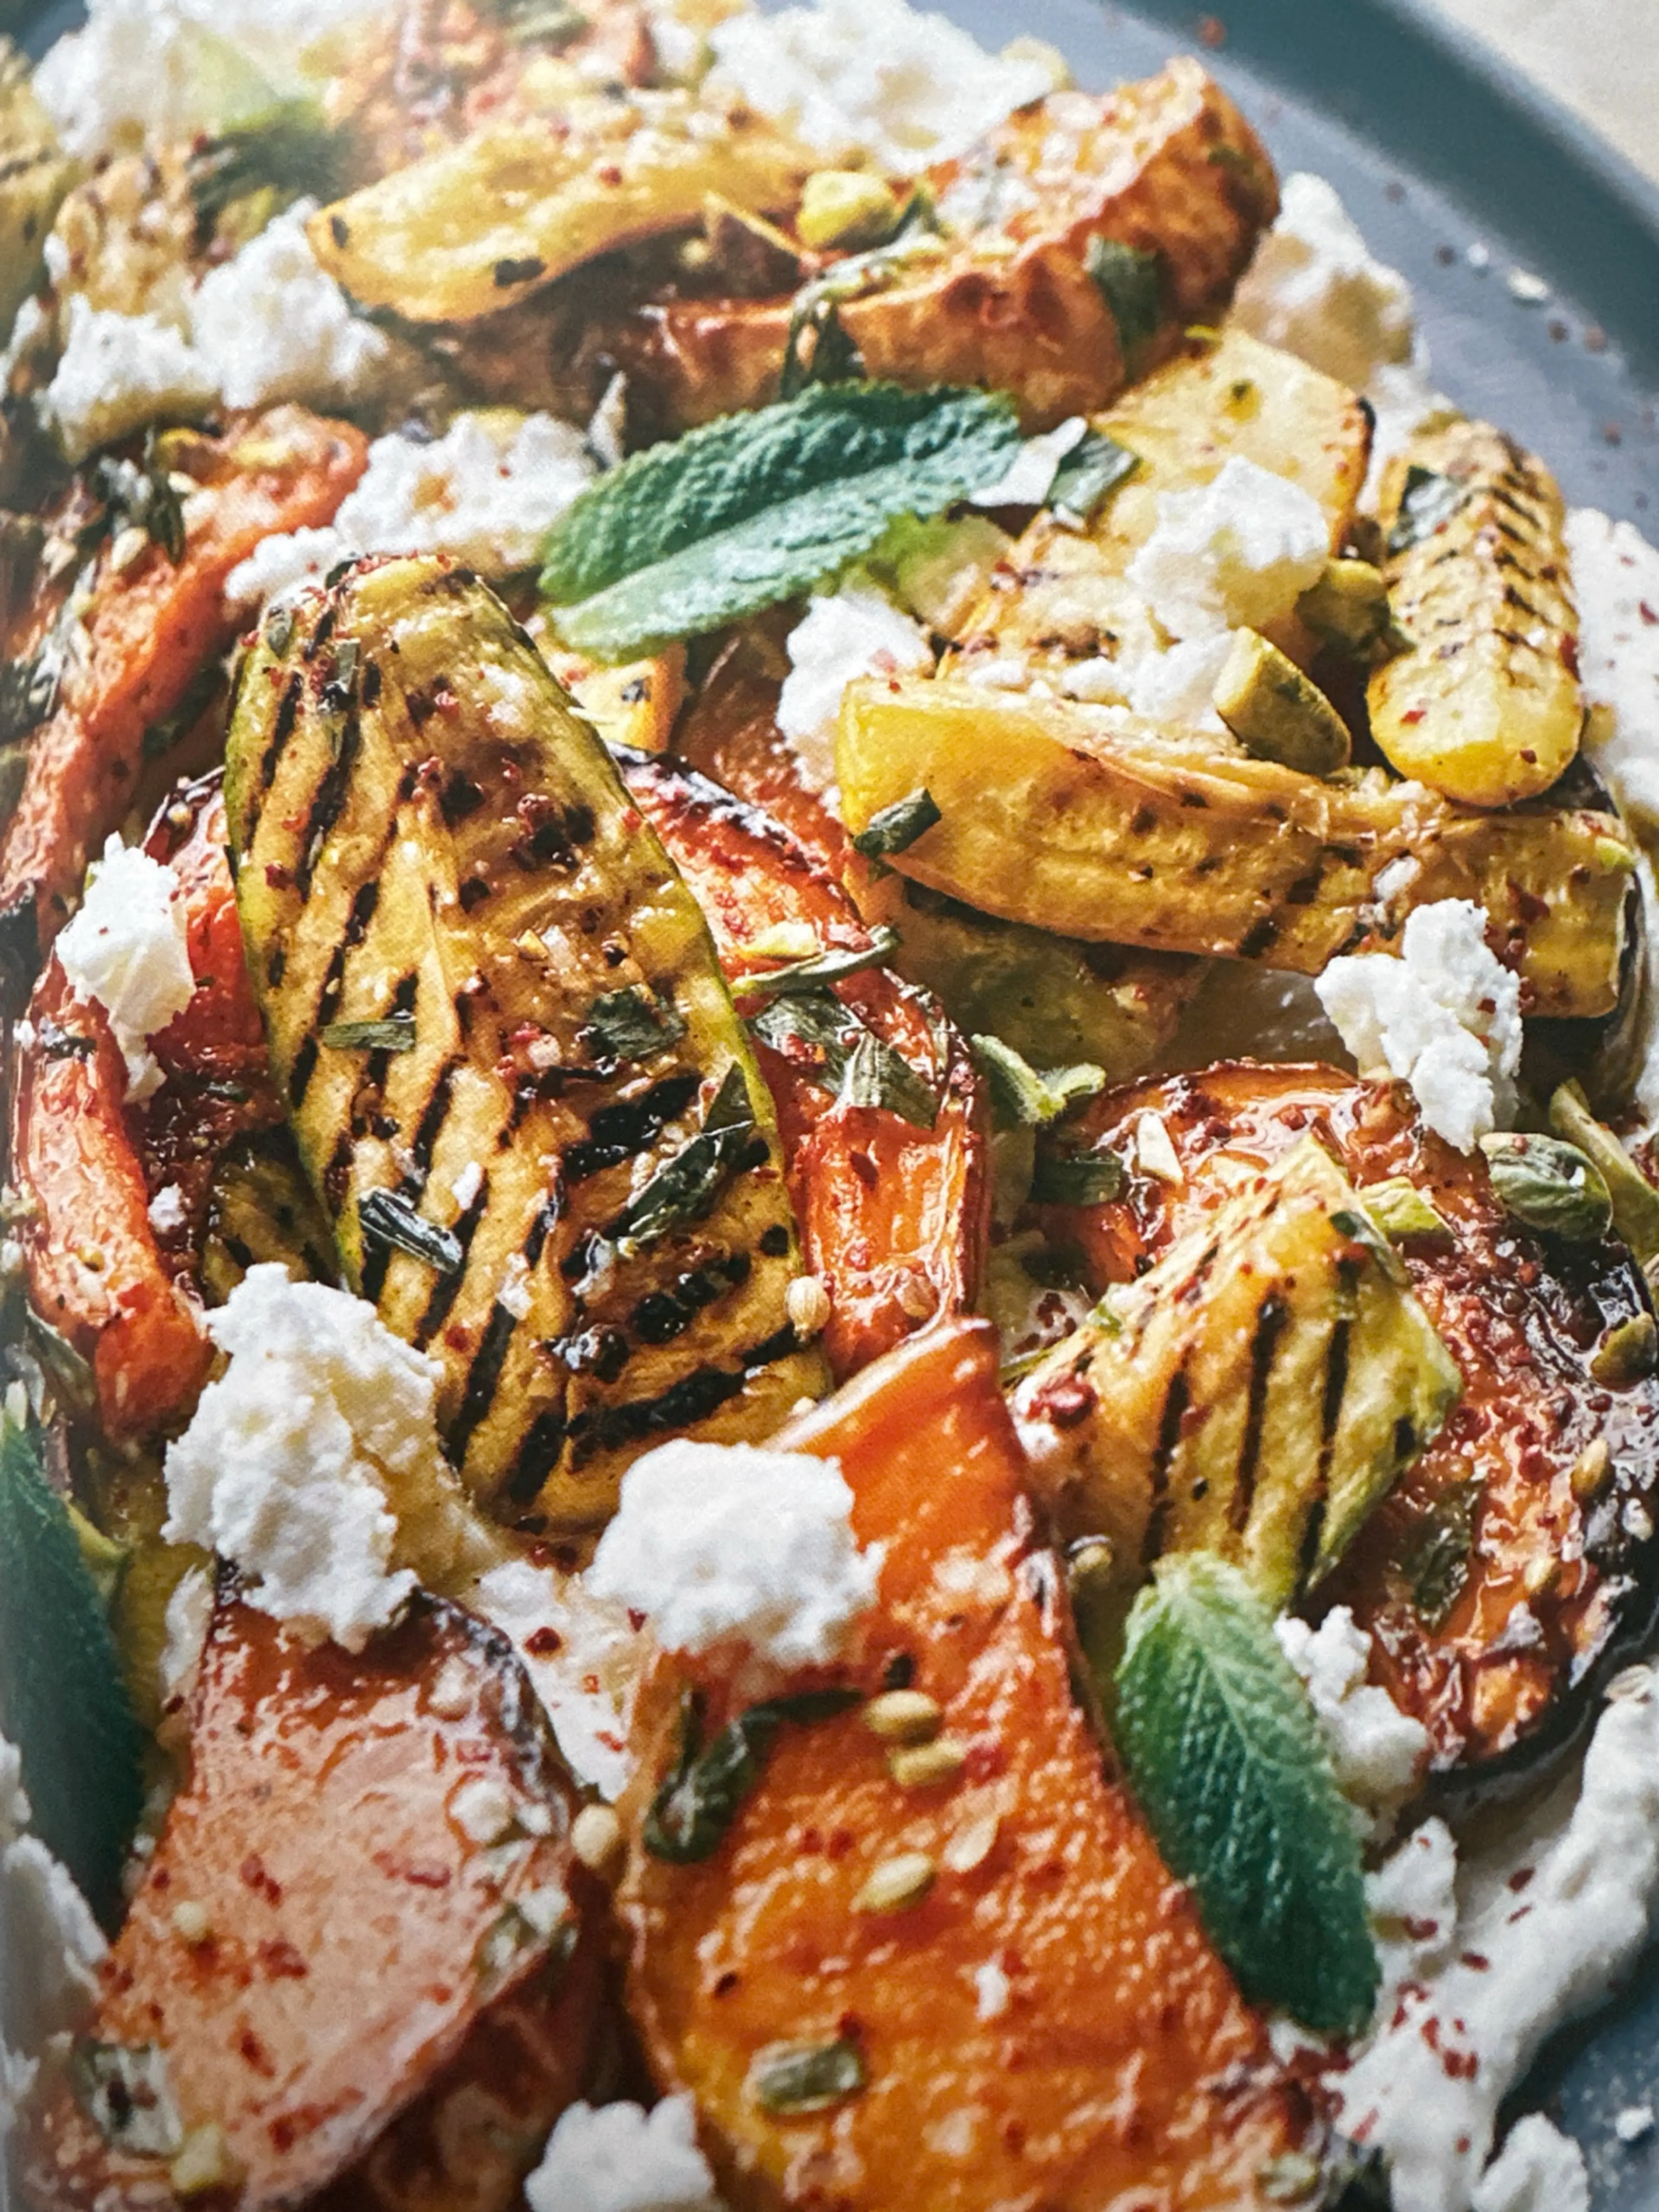 Roasted squash and courgettes with whipped feta and pistachi